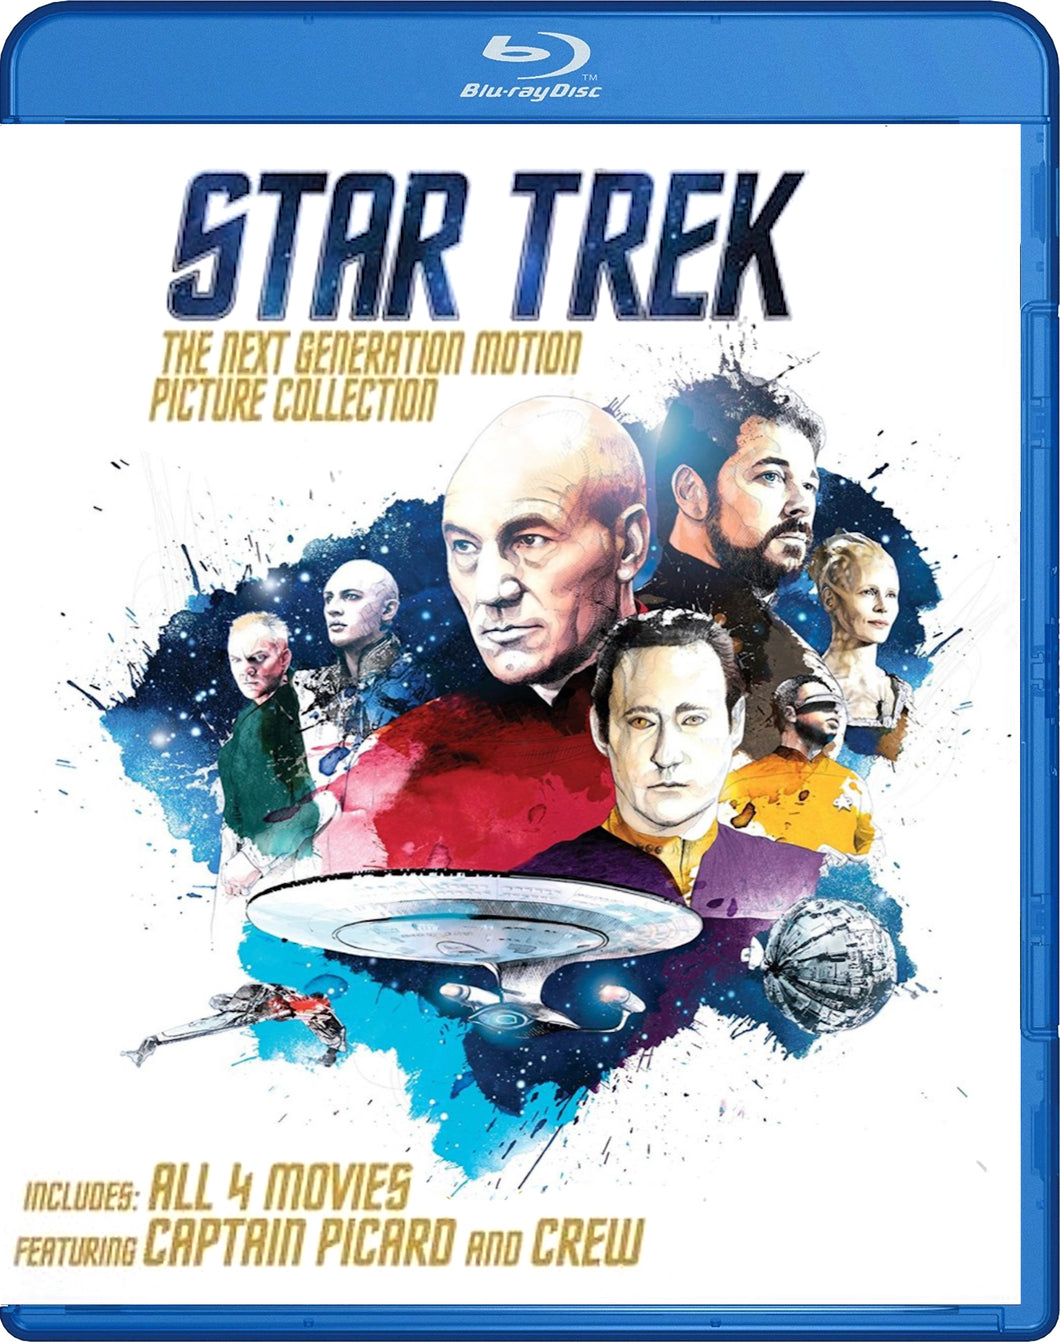 Star Trek: The Next Generation Motion Picture Collection Occaz